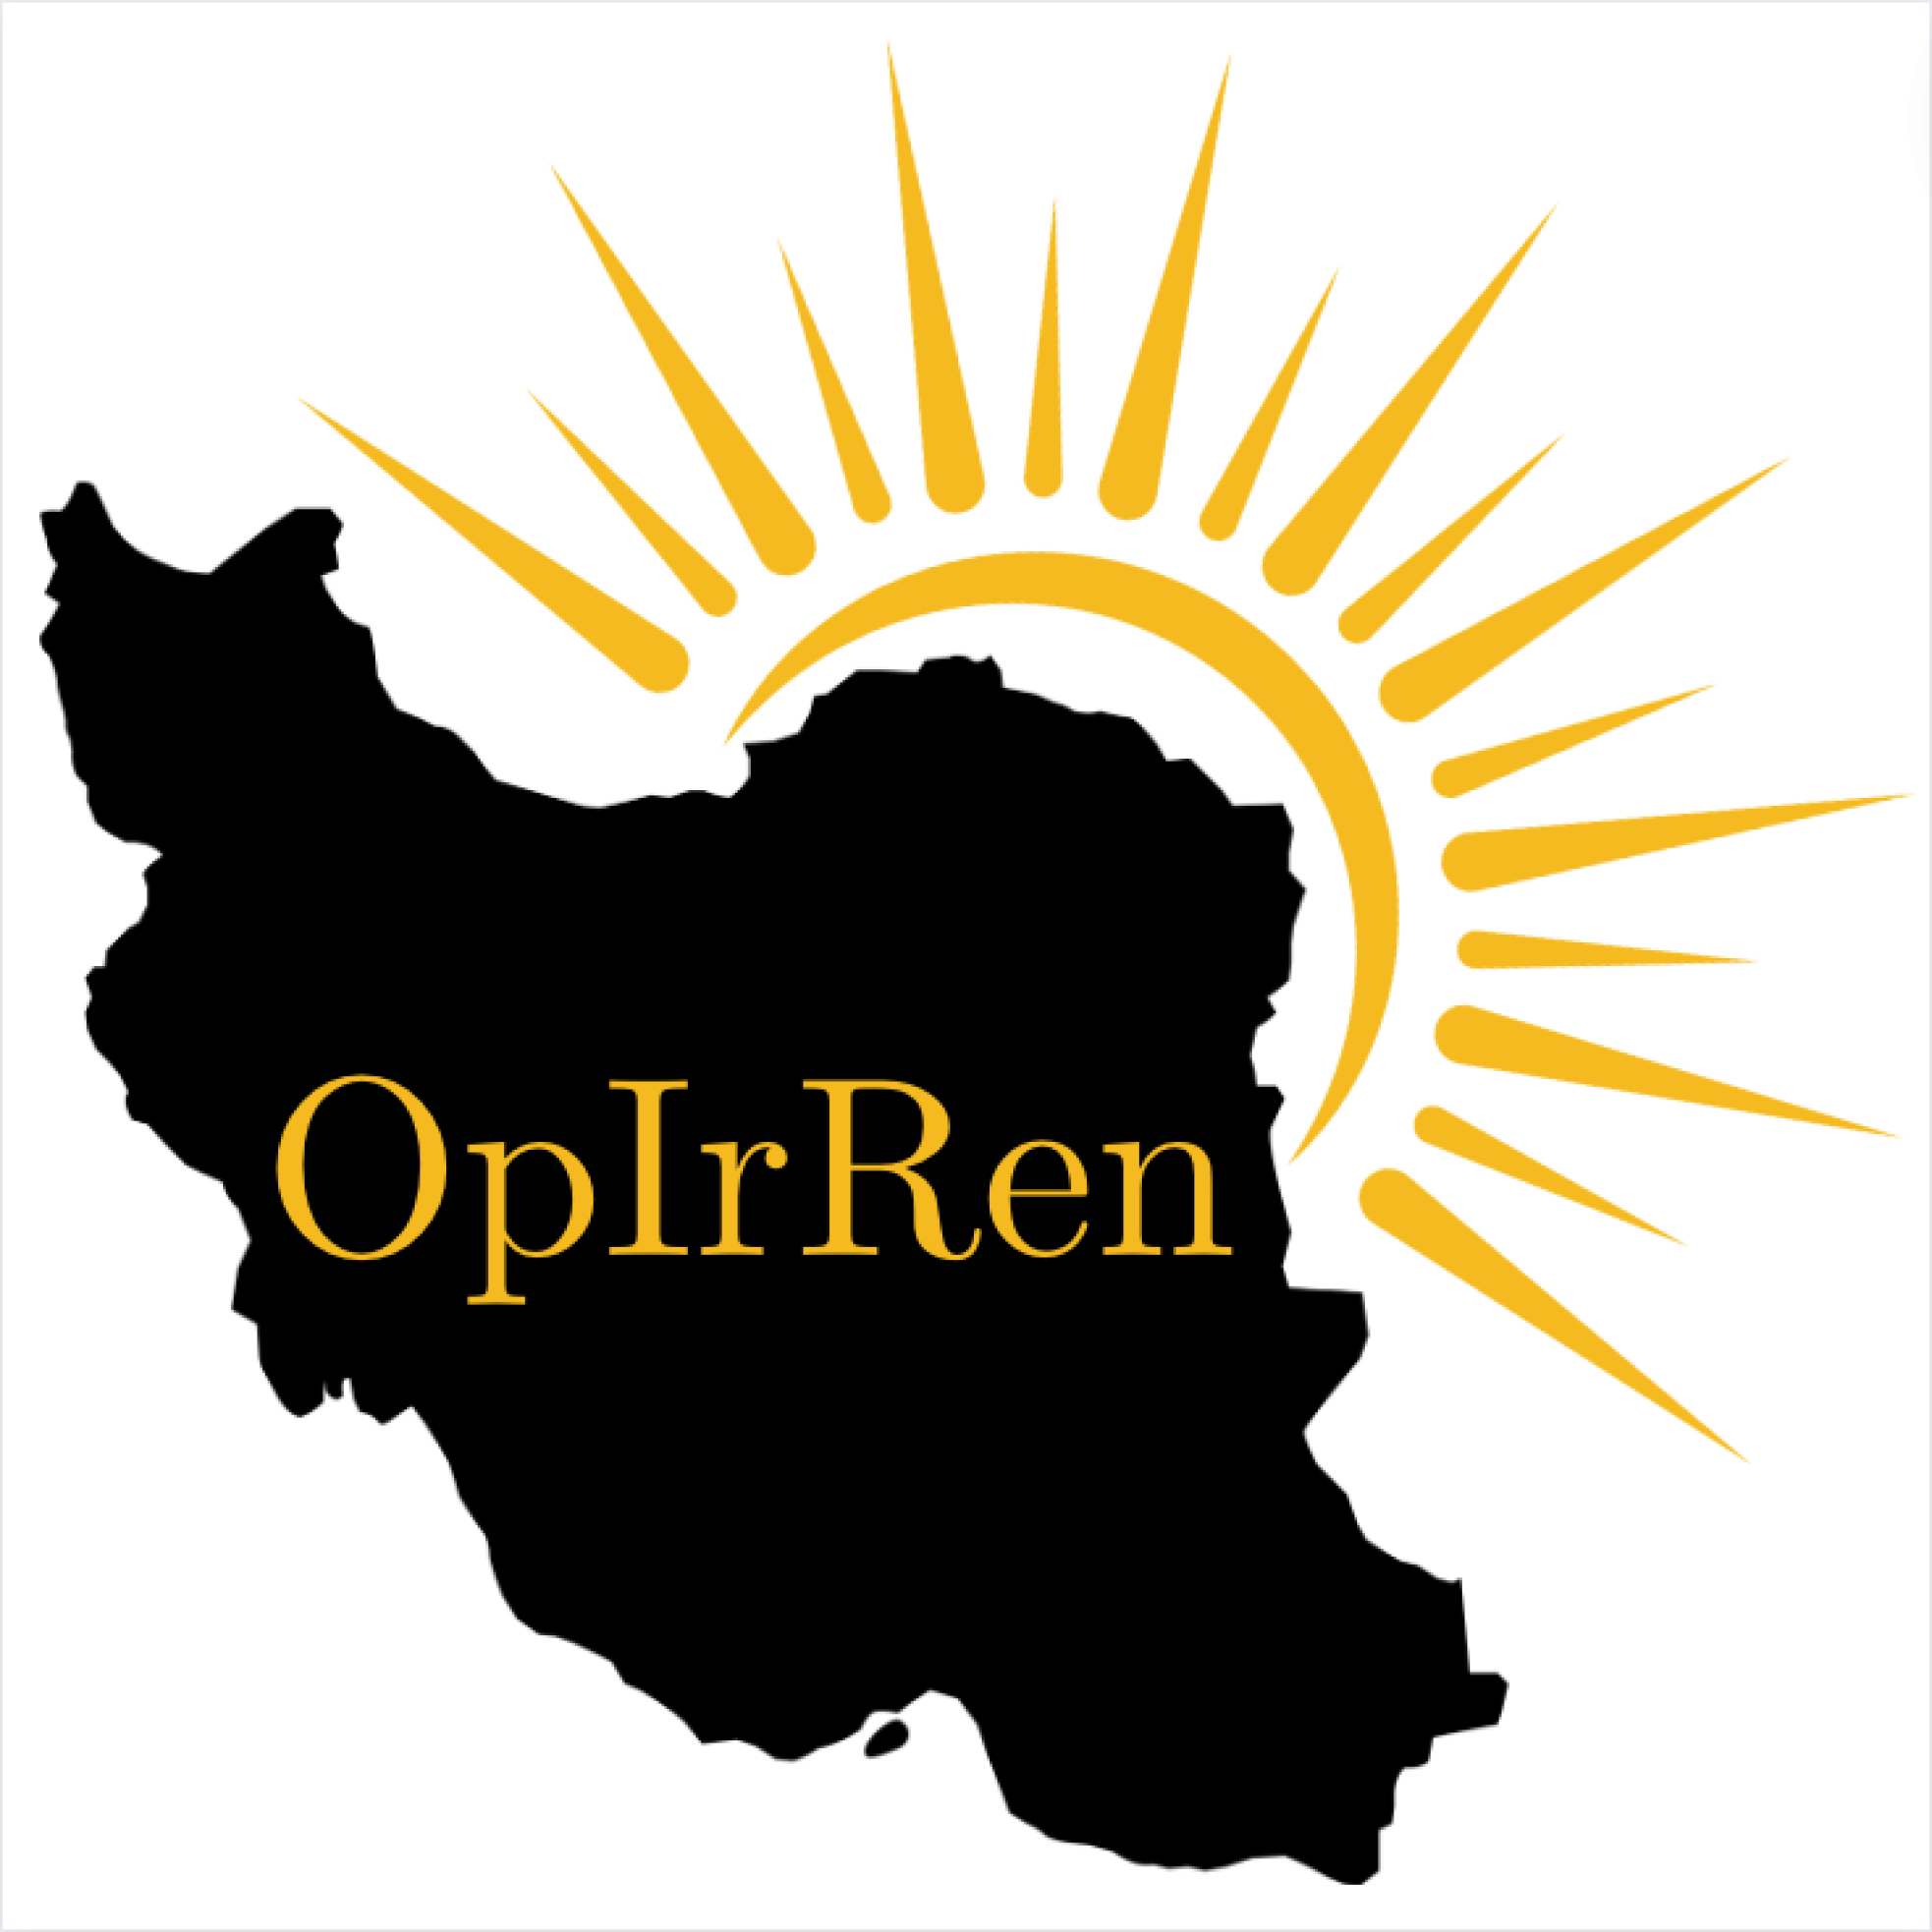 Operation Iranian Renaissance, abbreviated logo, containing the acronym 'OpIrRen' inside the black silhouette of Iran's land borders.